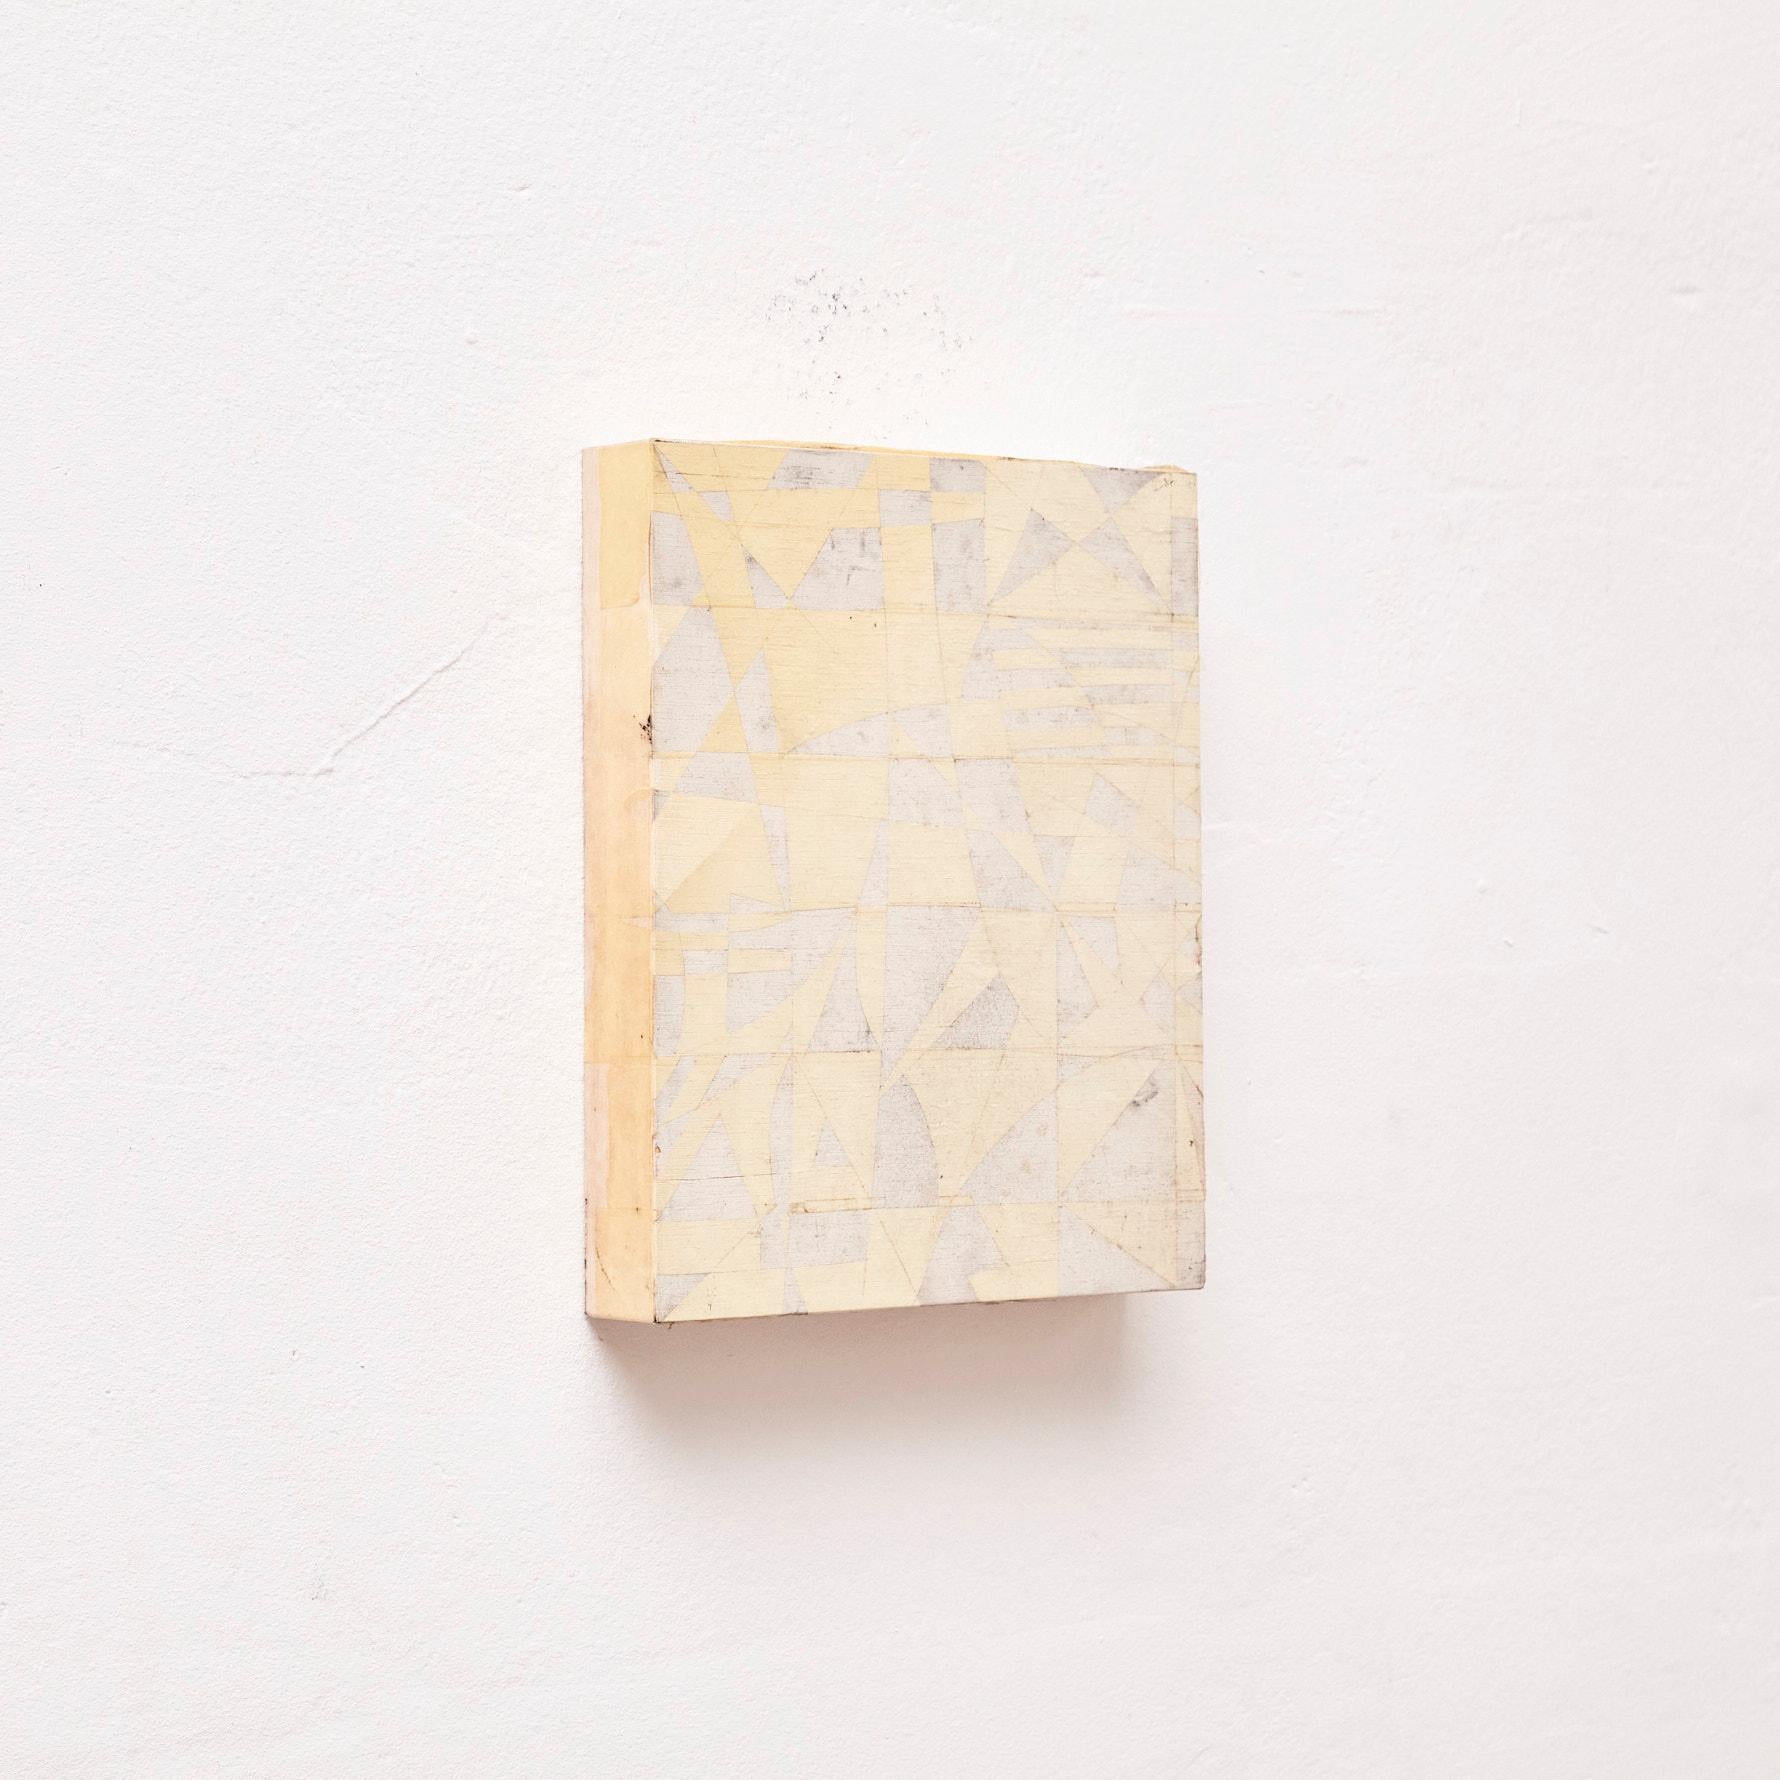 Sandro Abstract Paint, circa 2015.

Manufactured in Spain.

Materials:
Wood

Dimensions: 
D 4,7 cm x W 22,5 cm x H 27 cm

The artwork is in its original condition, showing minor signs of wear consistent with its age and use. These imperfections